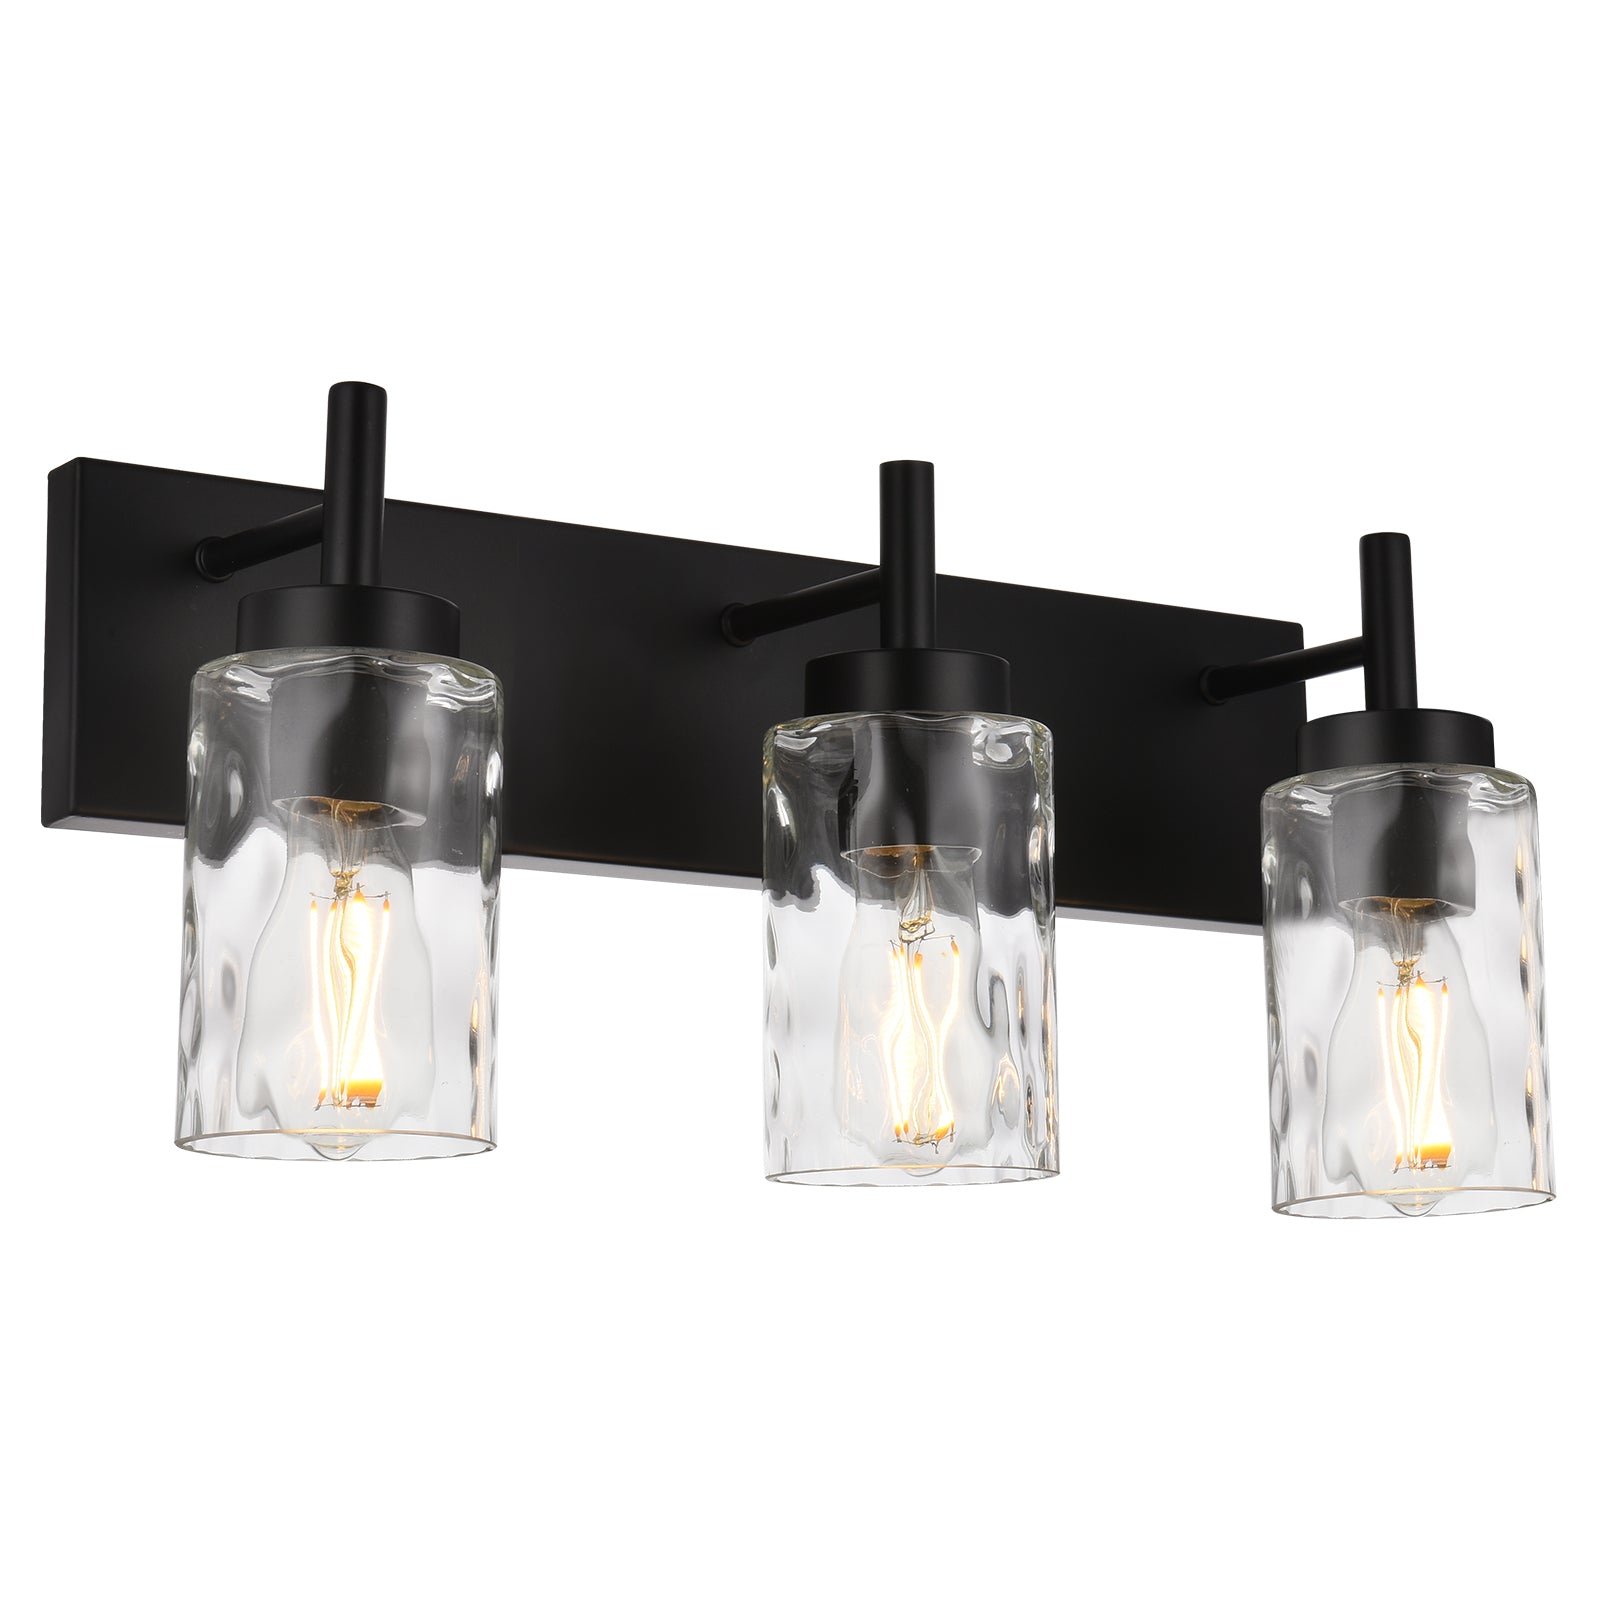 Vanity Light Fixtures 3 Light Modern Wall Sconces Lighting Black Bathroom Lights Wall Mounted with Hammered Glass Shade,Farmhouse Wall Light for Mirror Cabinets, Powder Room, Dressing Table